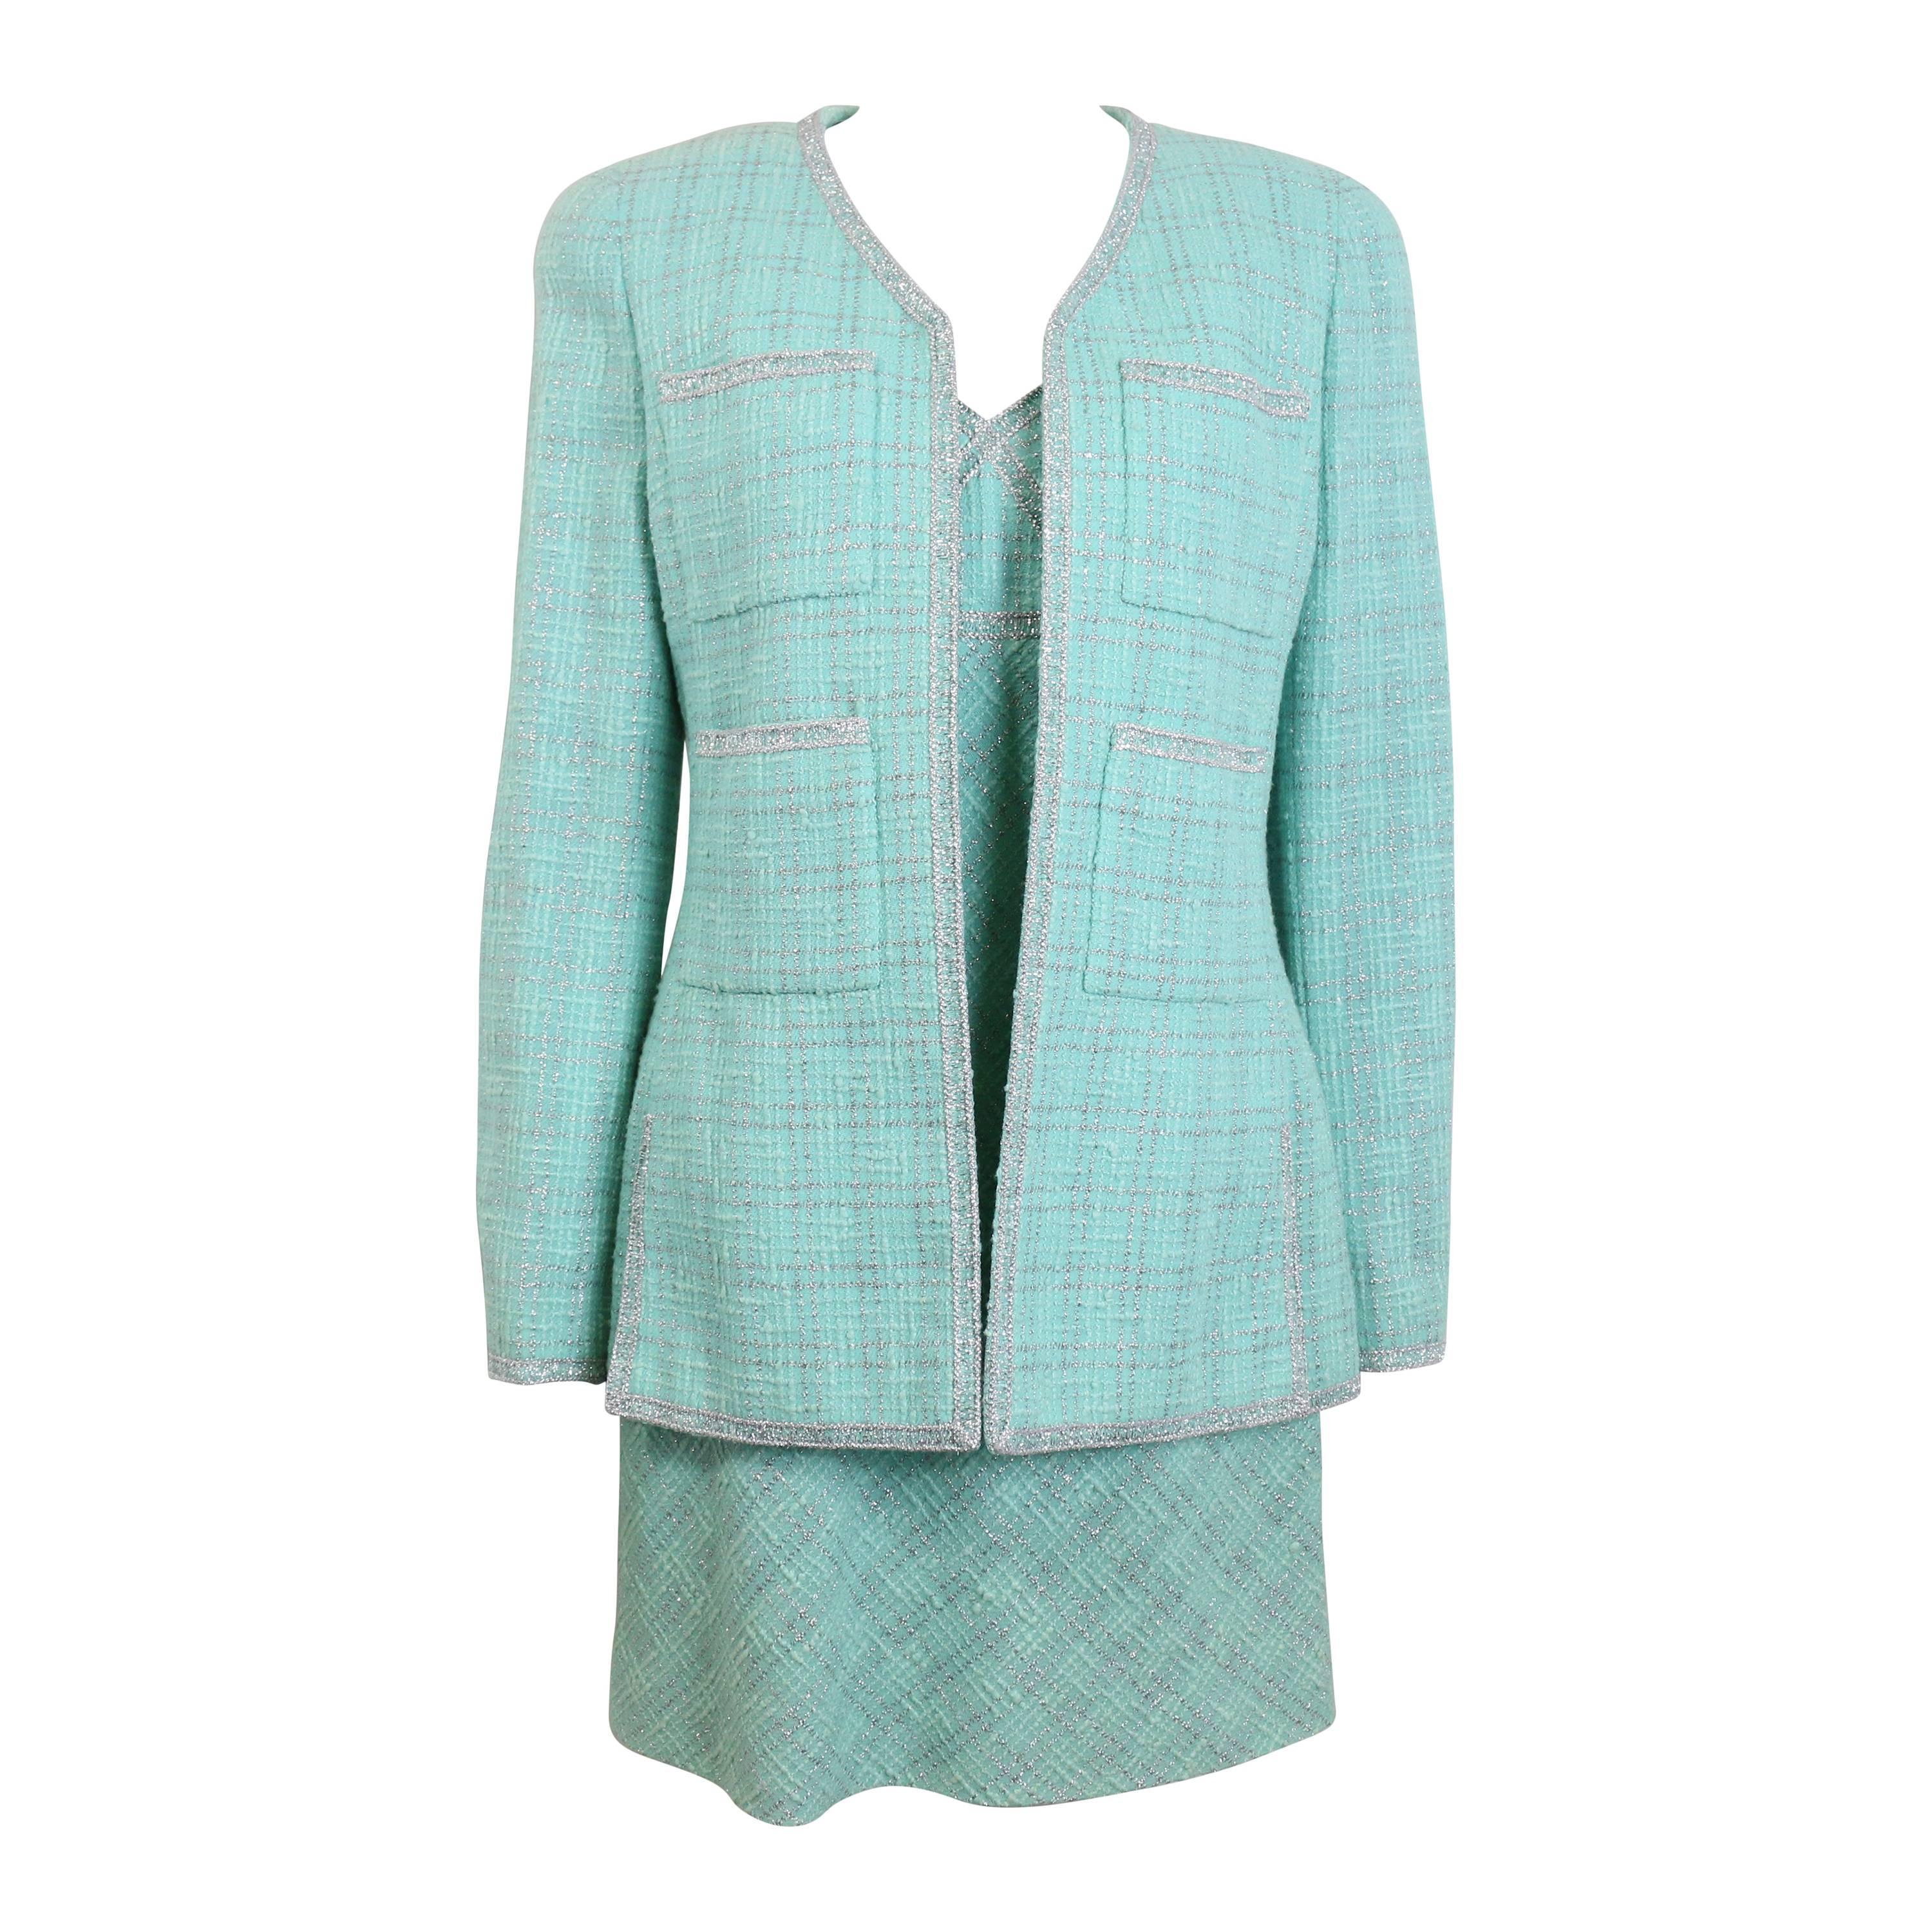 Chanel Green Tweed Dress Suit Ensemble For Sale